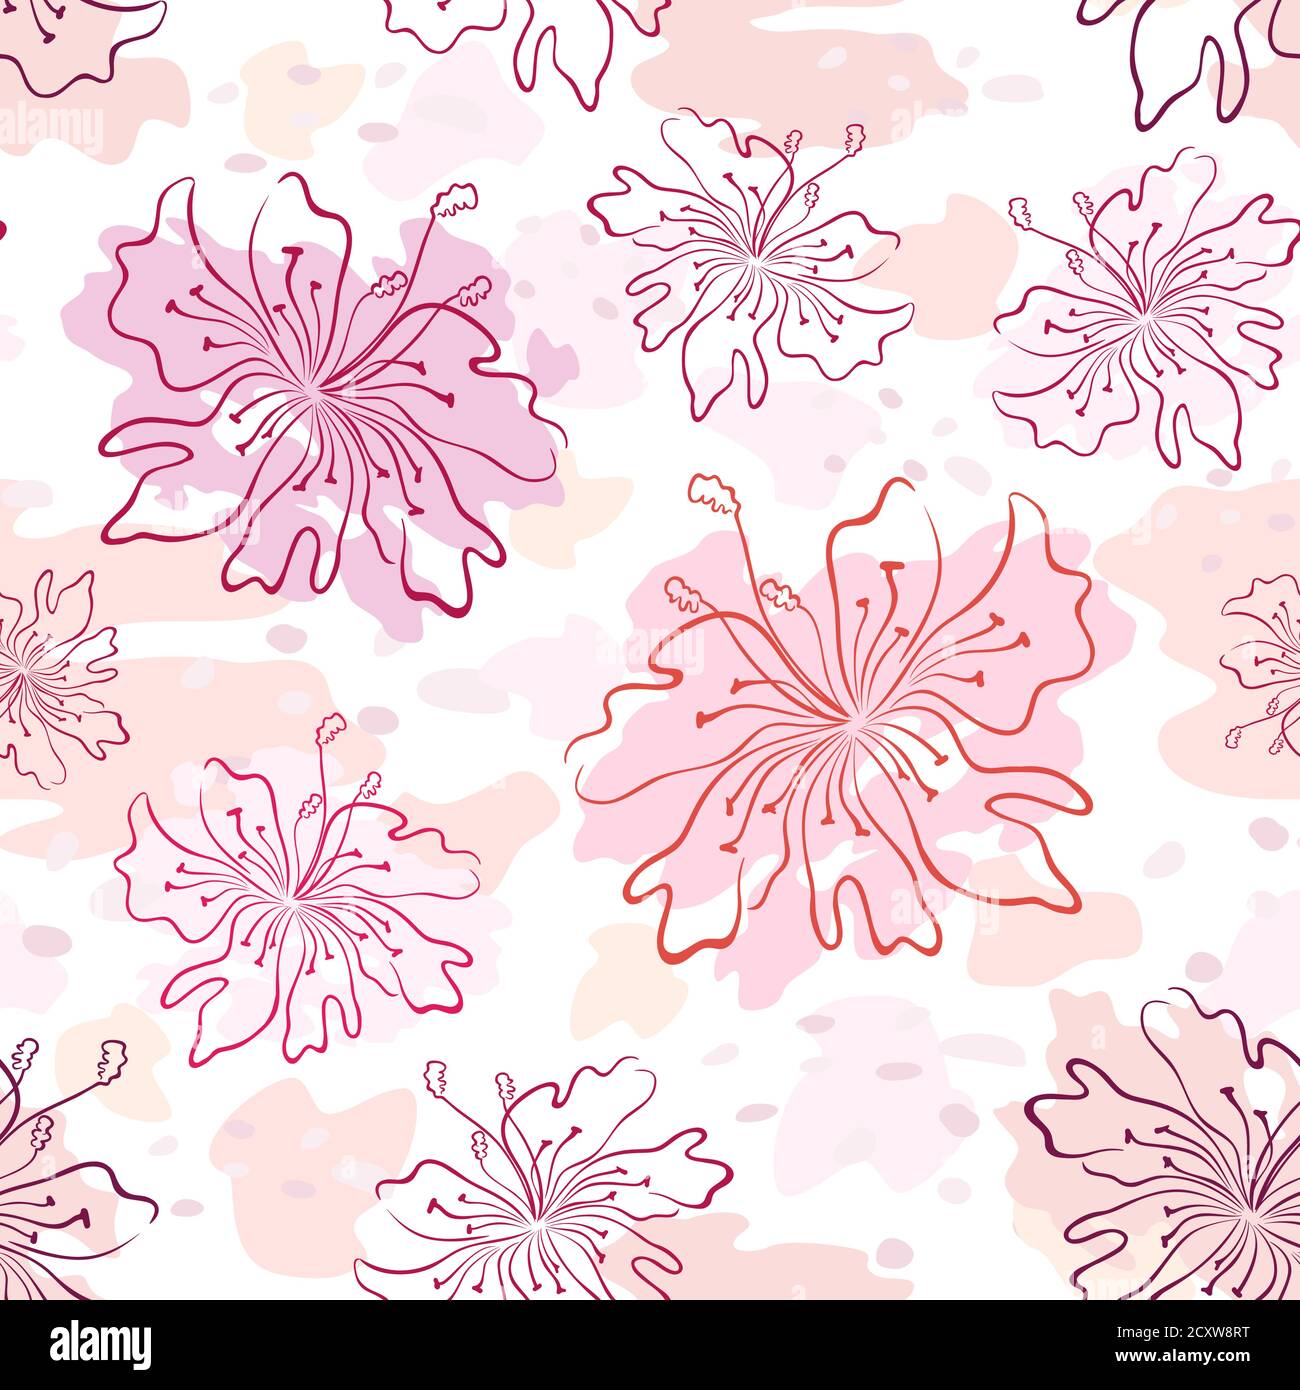 Seamless Pattern, Symbolical Flowers Contours on Abstract Tile Background. Vector Stock Vector